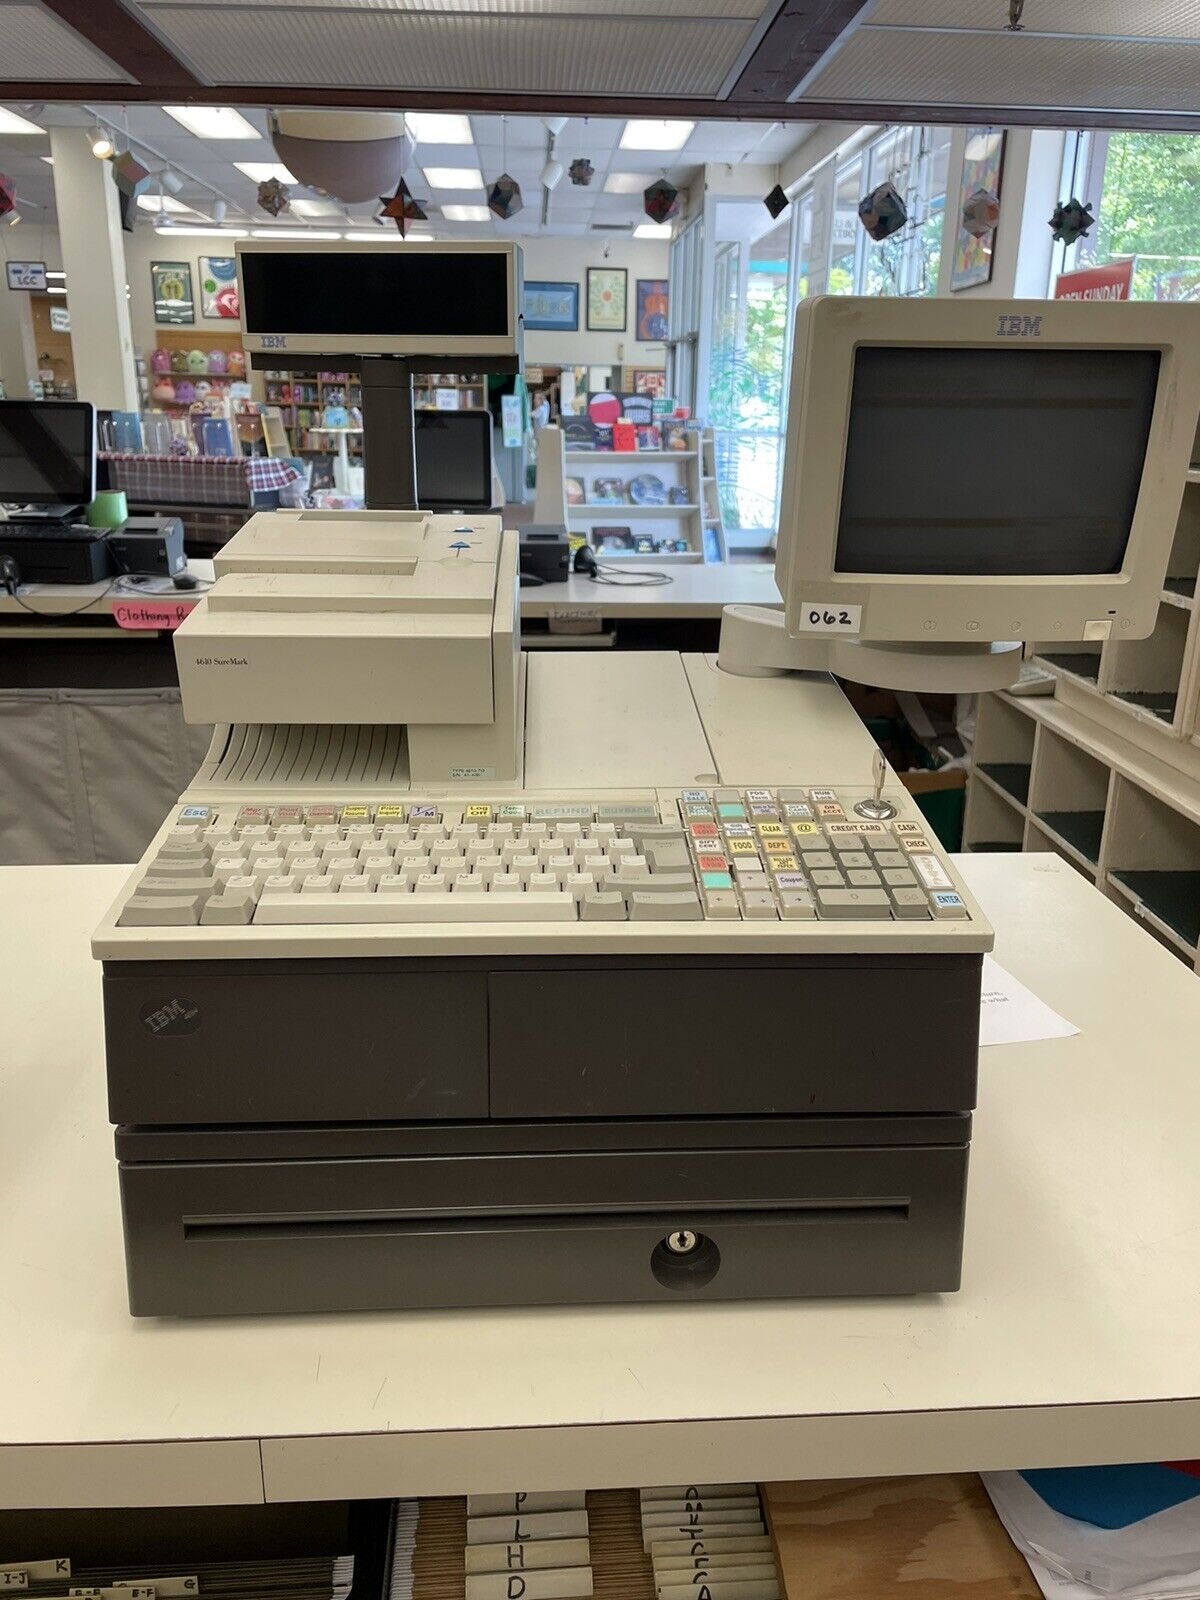 IBM 4694-347 PC BASED POS System (COMPLETE WITH DRAWER, PRINTER, DISPLAYS)